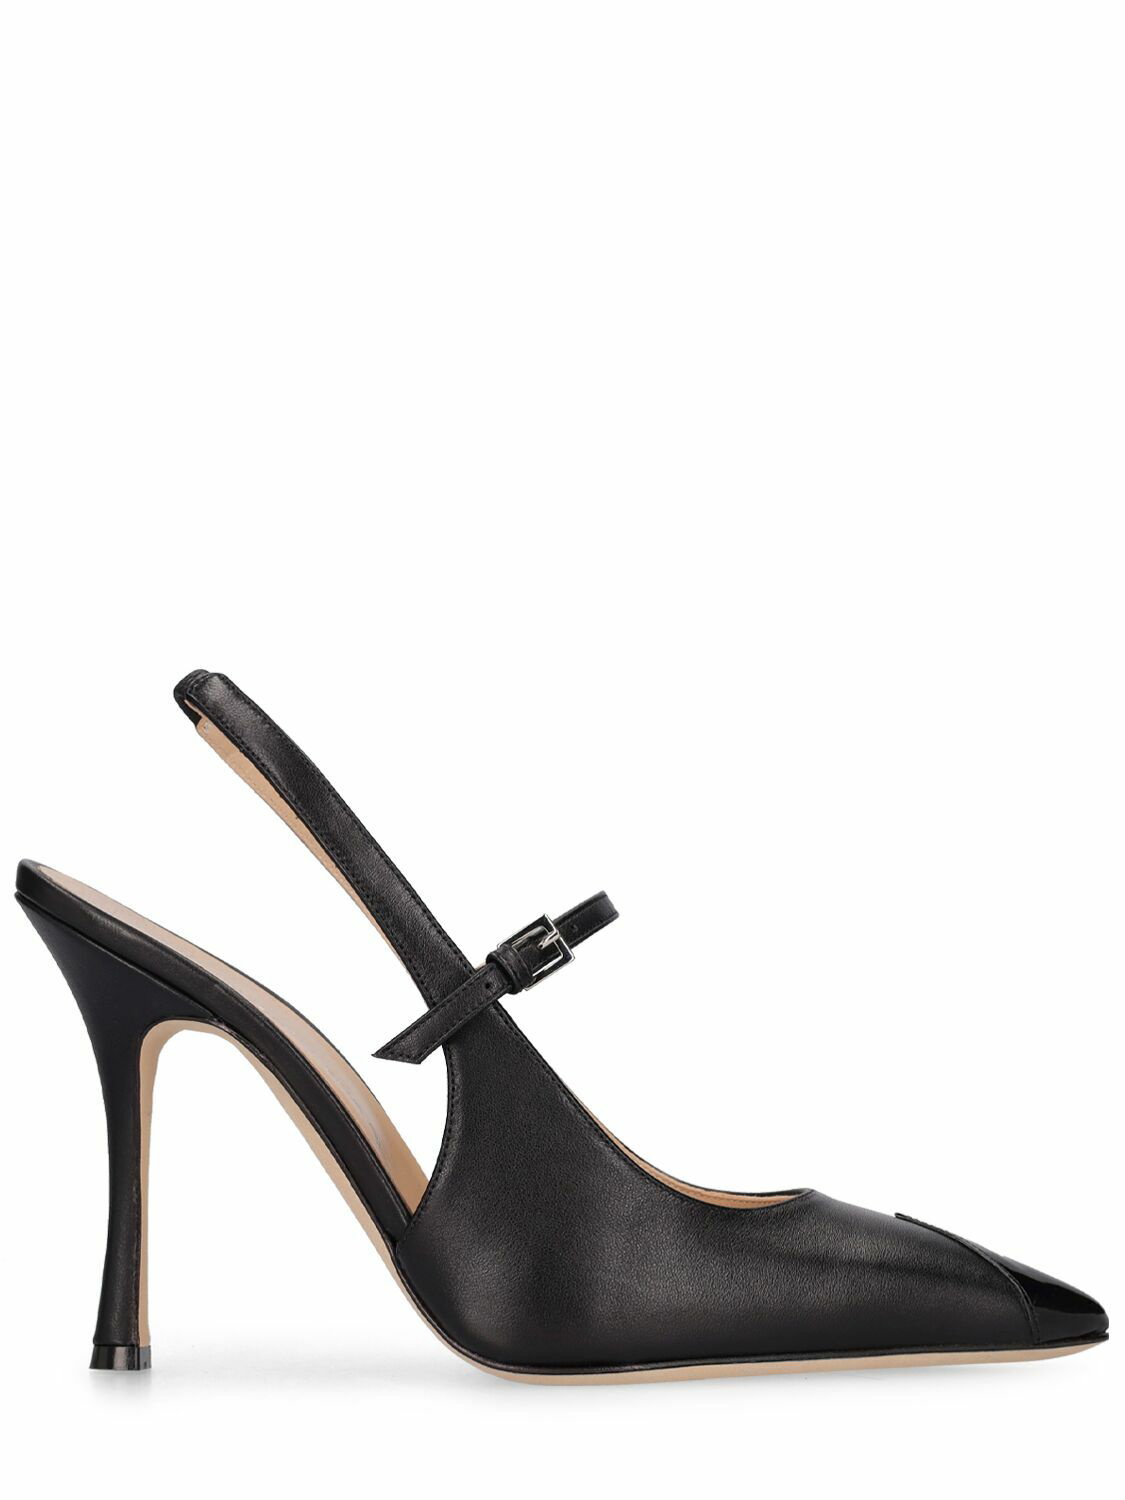 ALESSANDRA RICH - 100mm Leather Slingback Pumps Alessandra Rich